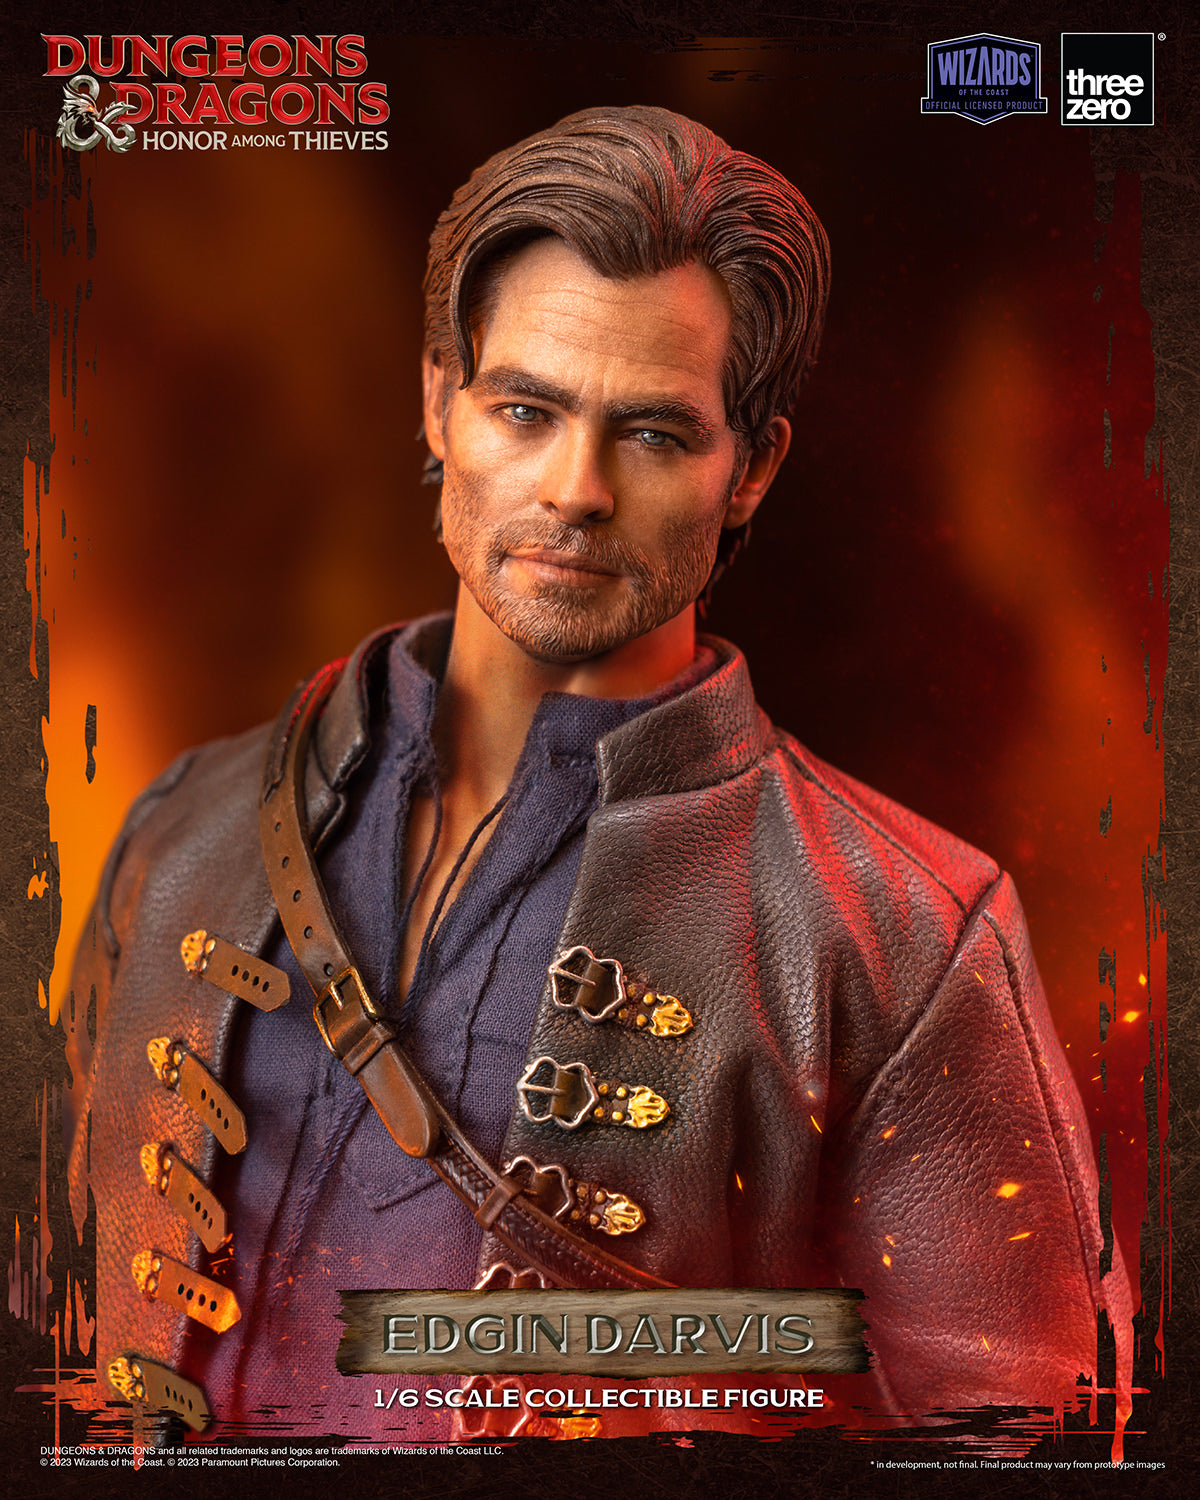 Dungeons & Dragons Edgin Darvis 1/6 Scale Figure